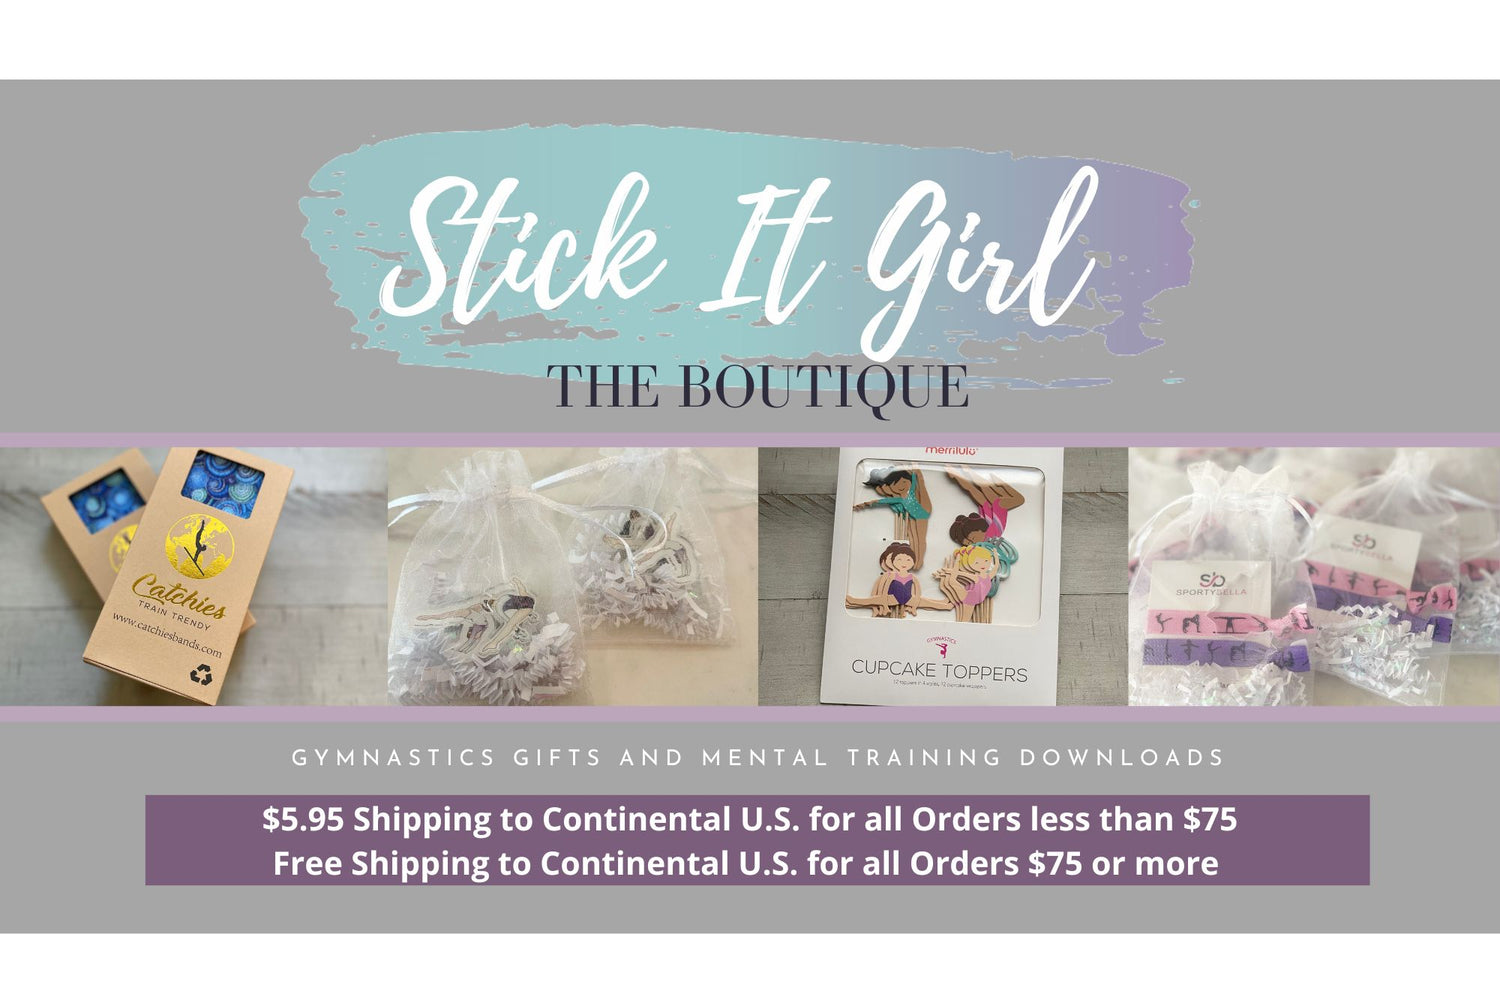 Stick It Girl Boutique - Gymnastics Gifts